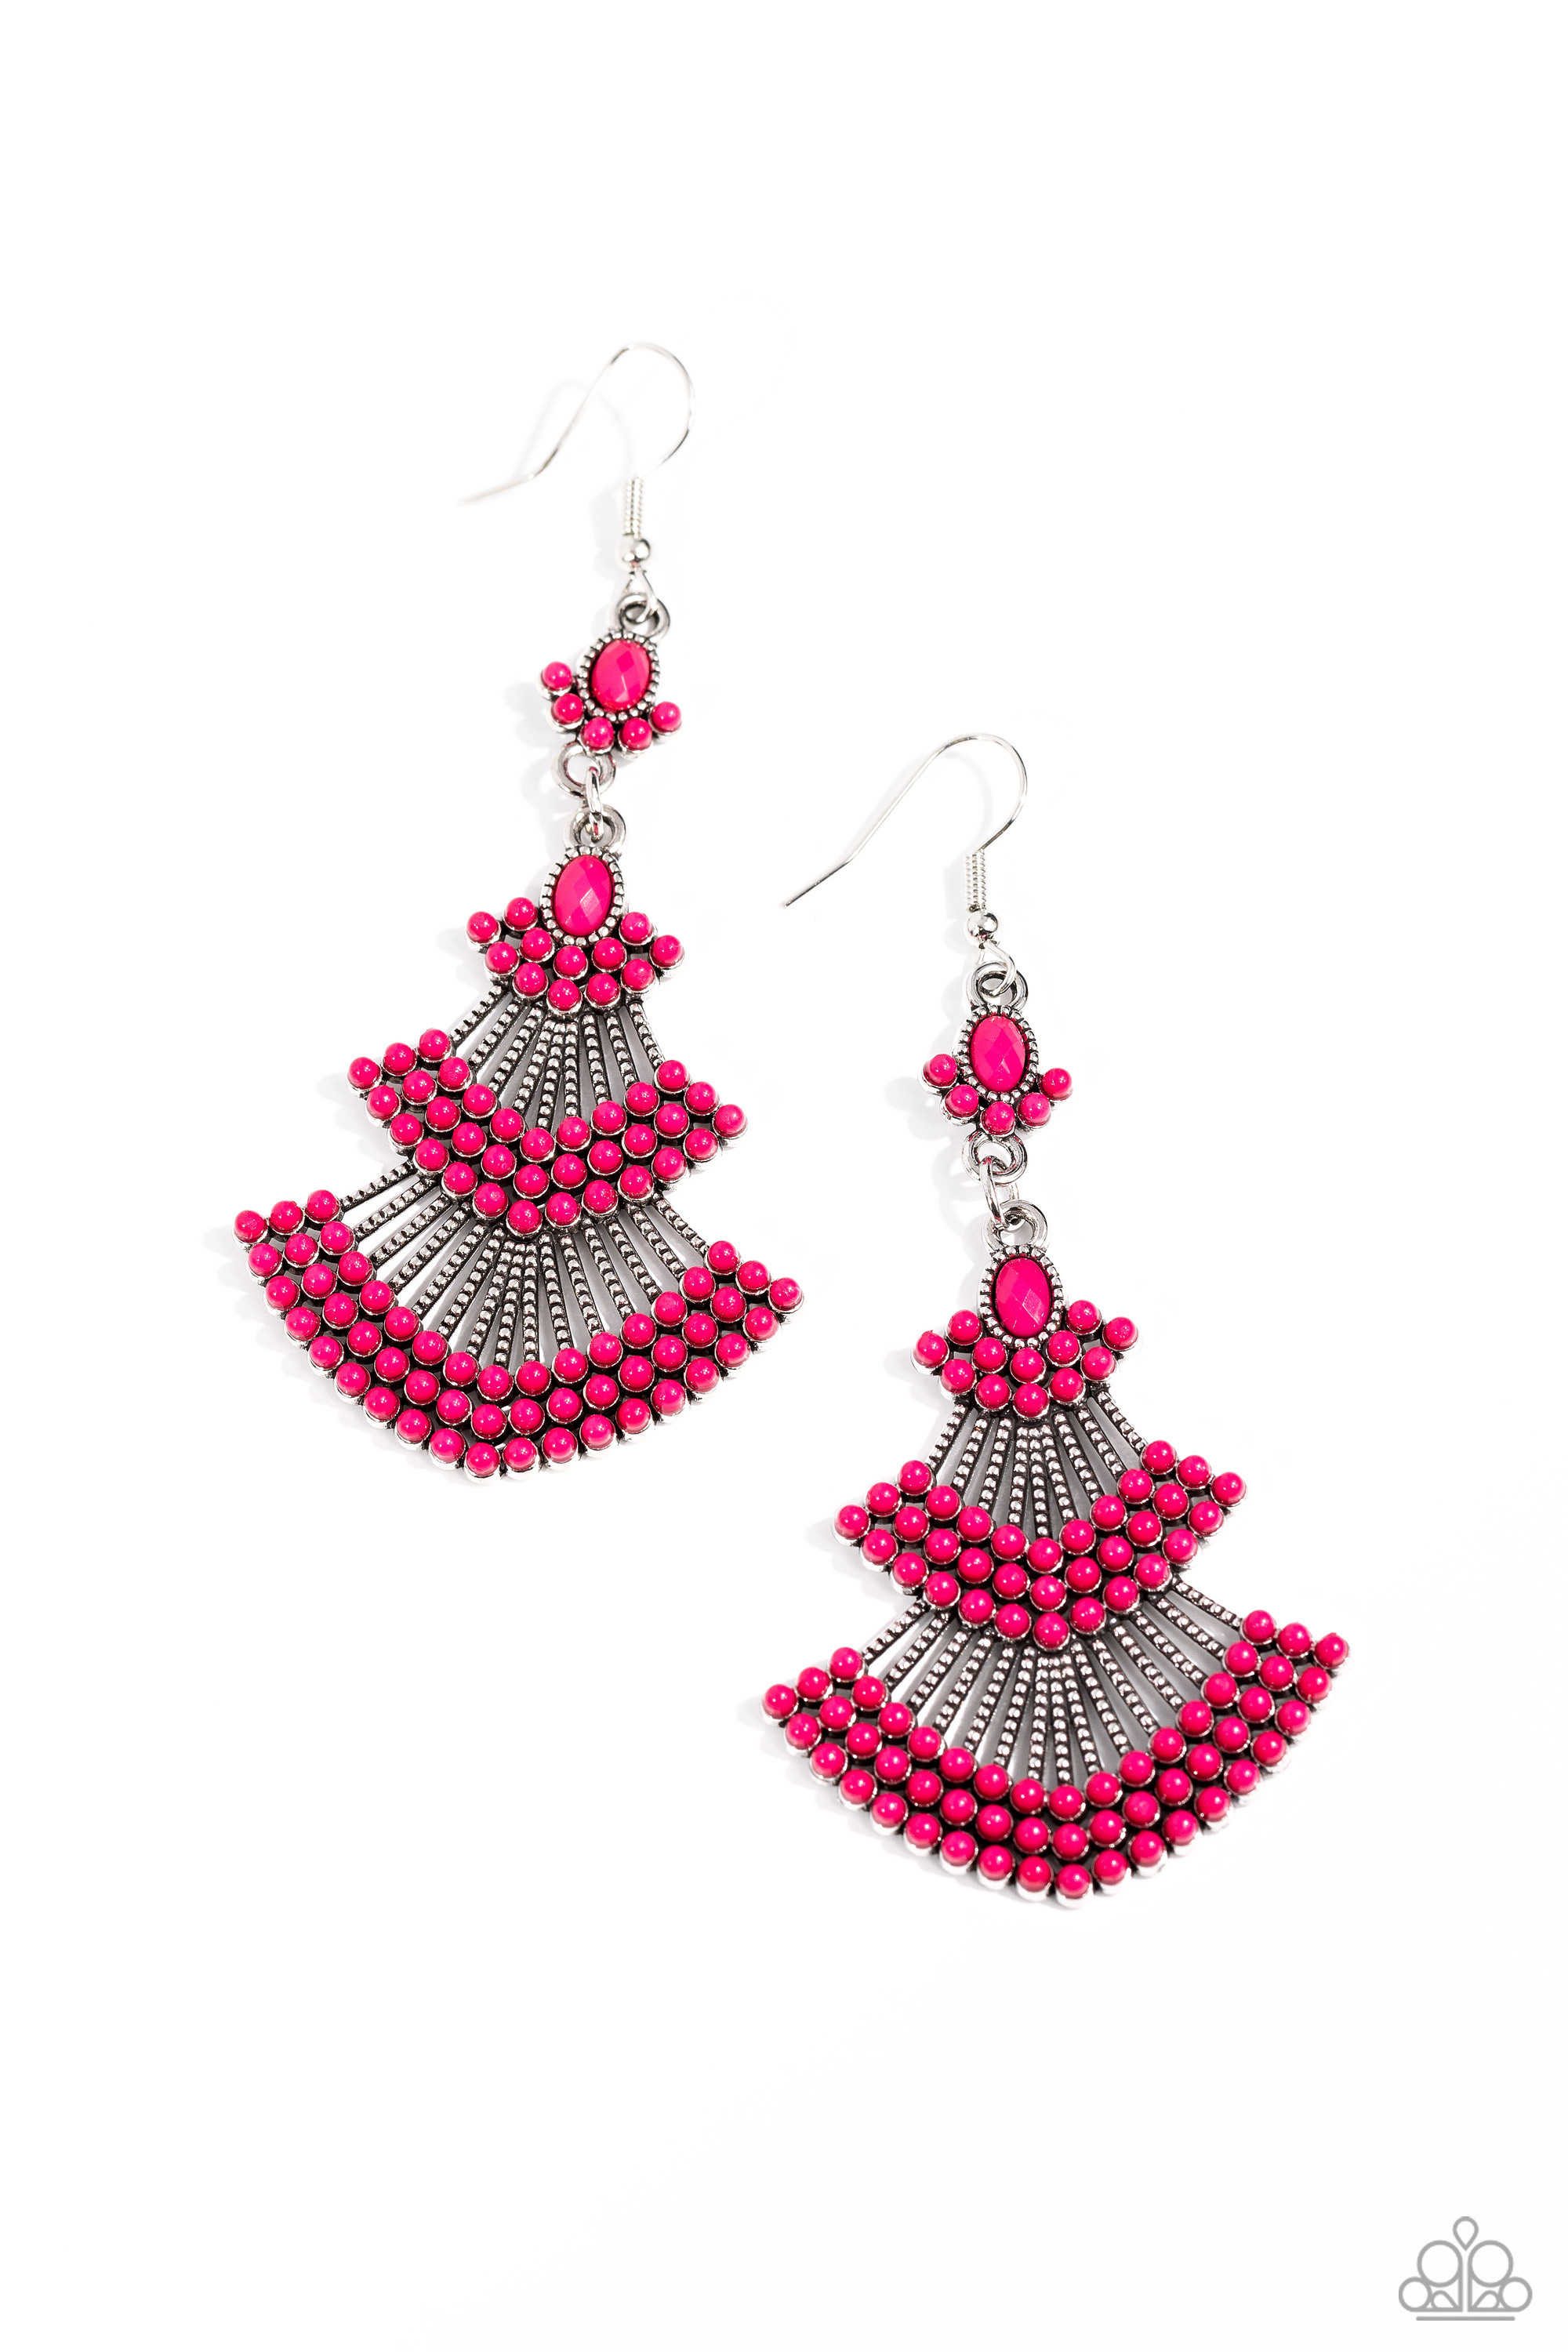 Paparazzi Accessories: Eastern Expression - Pink | Paparazzi Accessories